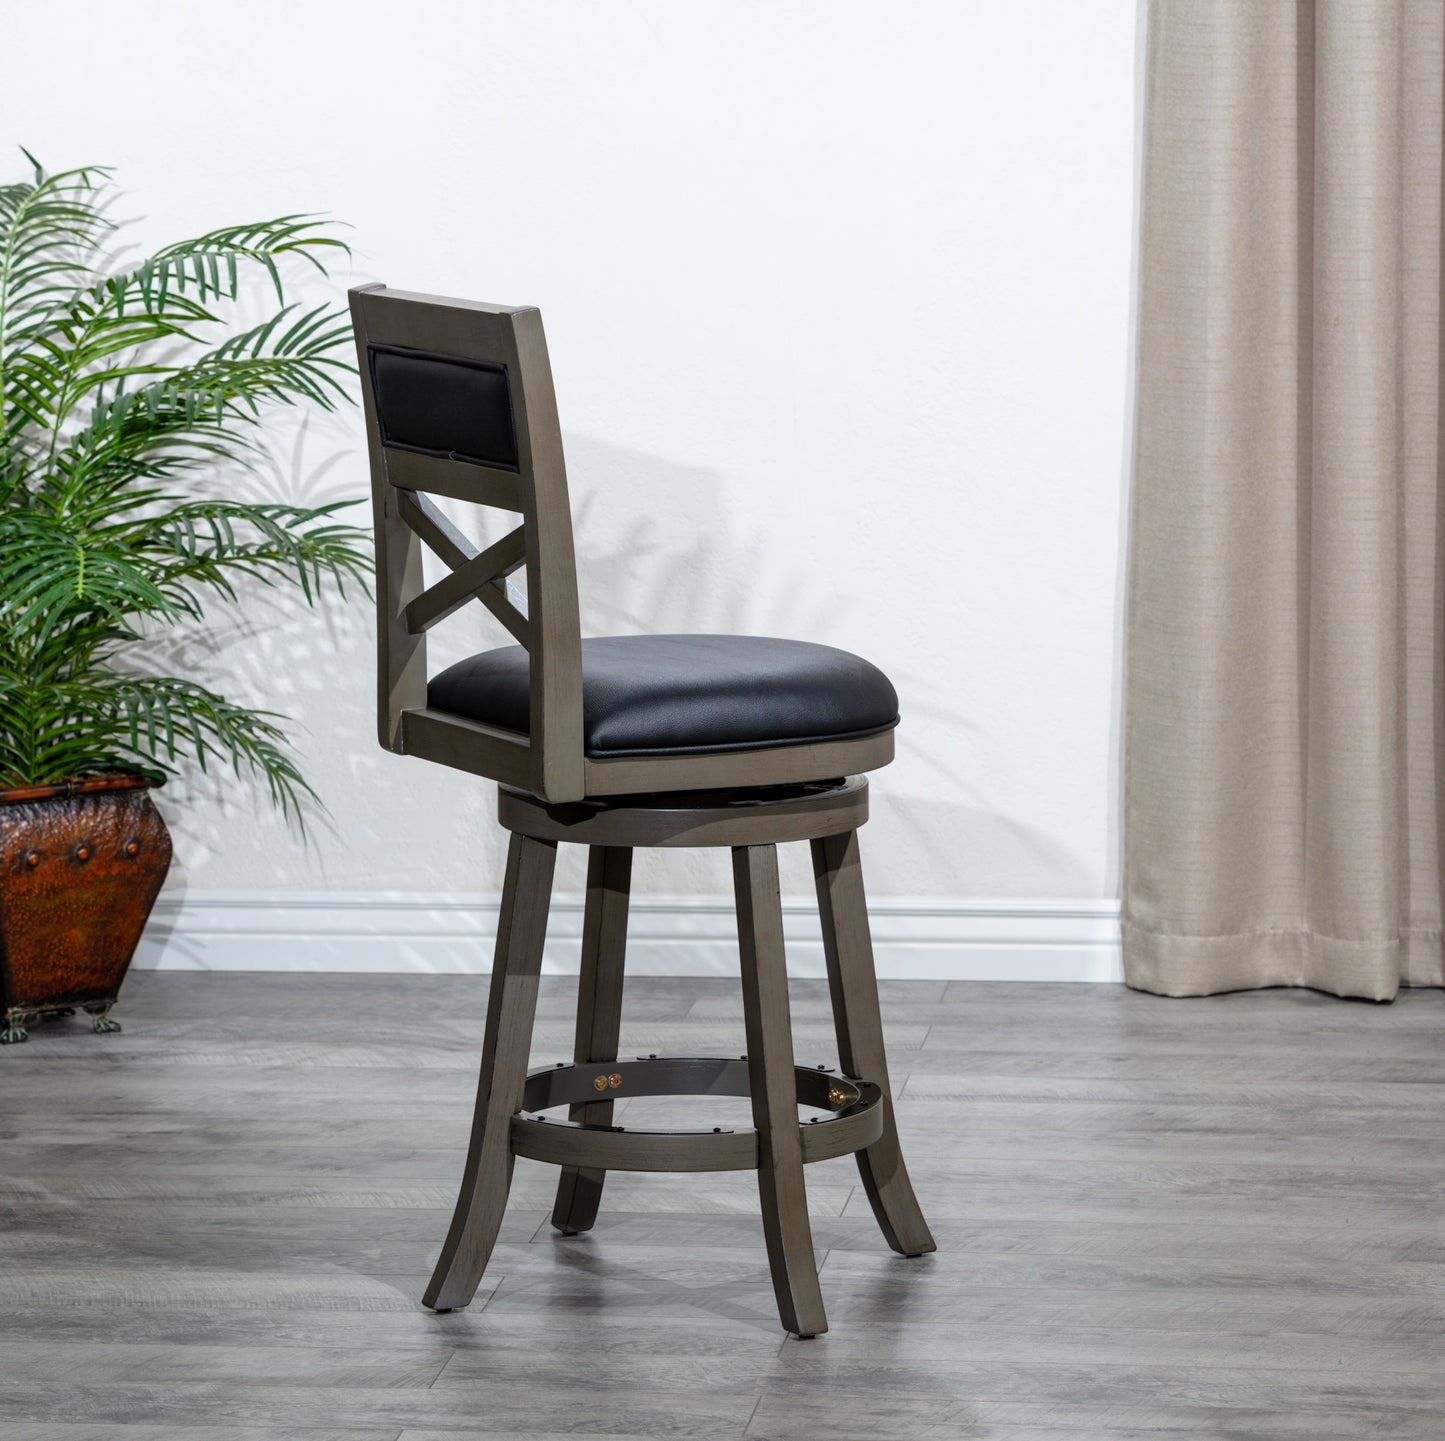 1st Choice Elegant 30" X-Back Swivel Stool in Weathered Gray - Luxurious Seating Solution